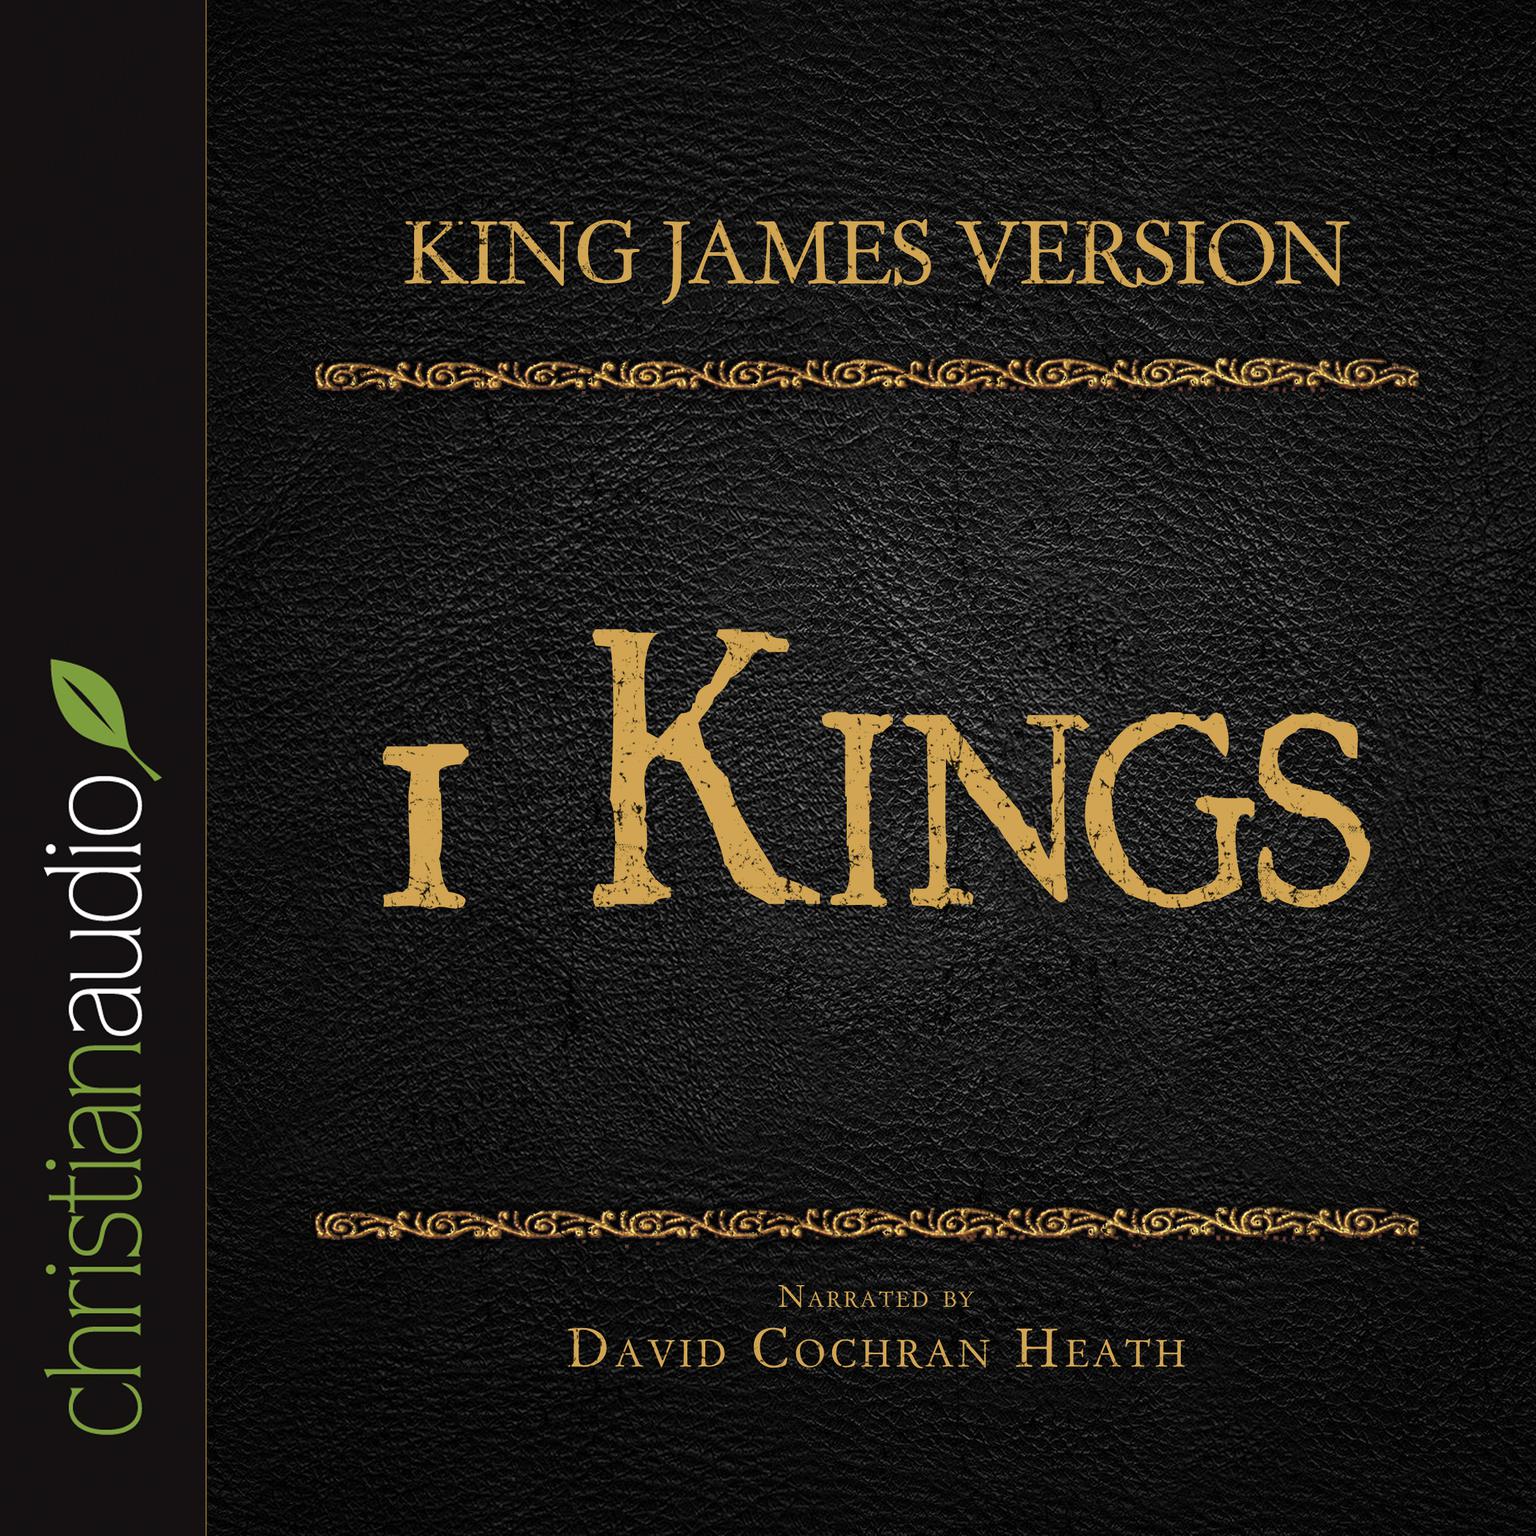 Holy Bible in Audio - King James Version: 1 Kings Audiobook, by christianaudio